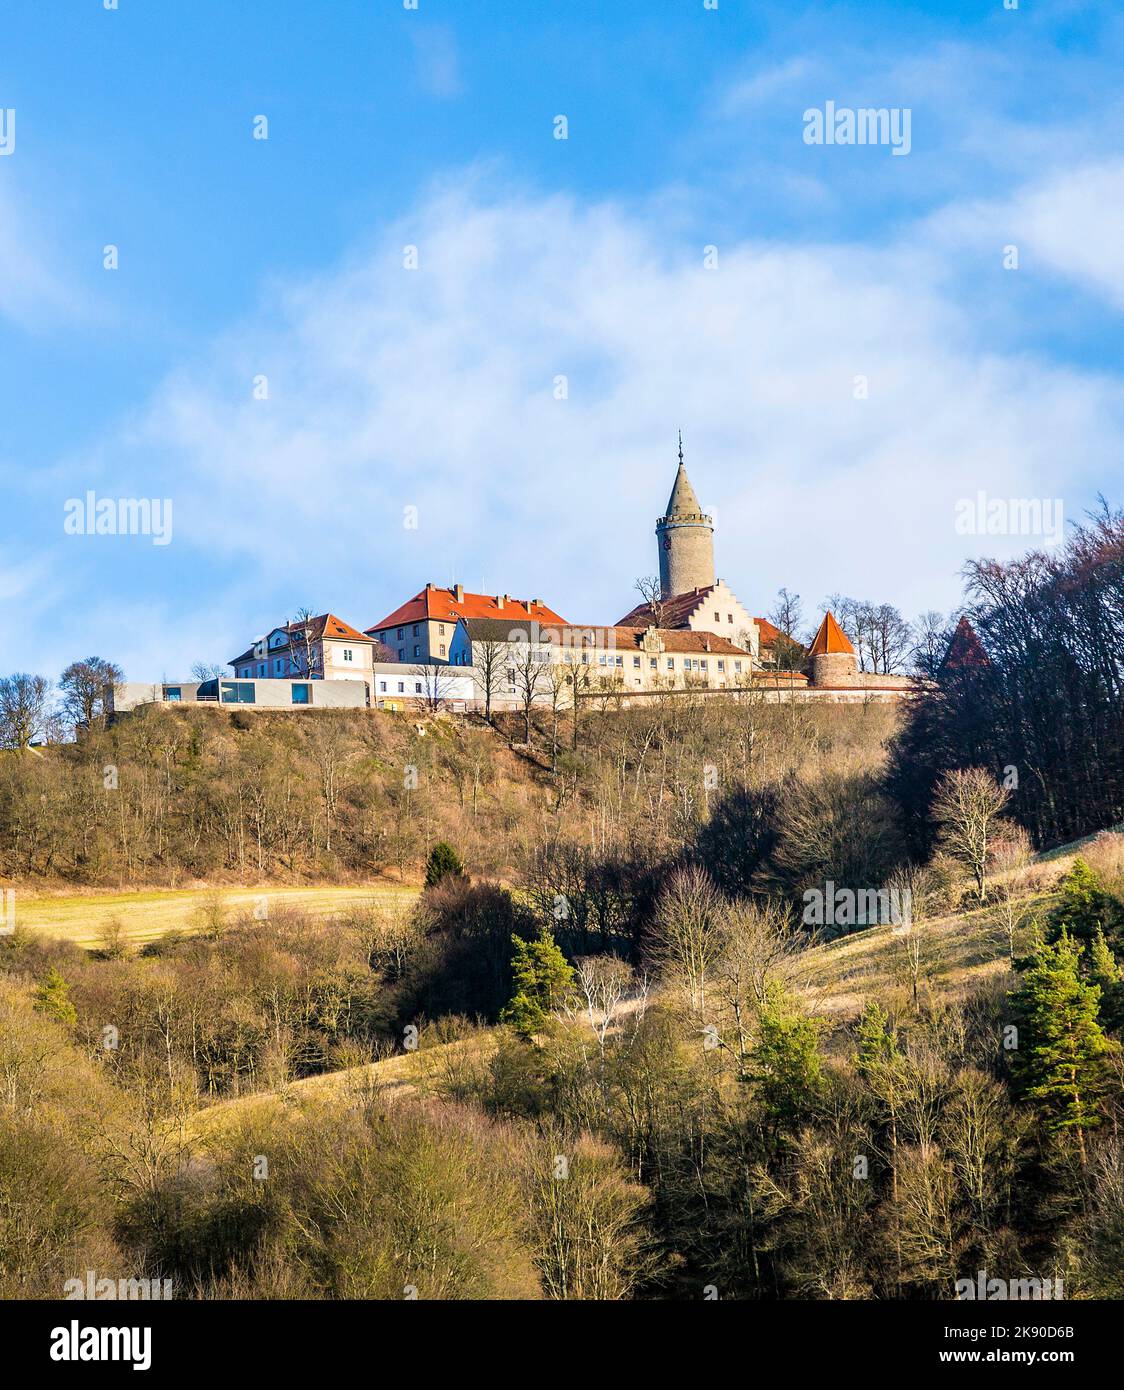 KAHLA, GERMANY - JAN 10, 2016: famous medieval Leuchtenburg near Kahla under blue sky. The Leuchtenburg was first mentionned in 1221 and is also calle Stock Photo